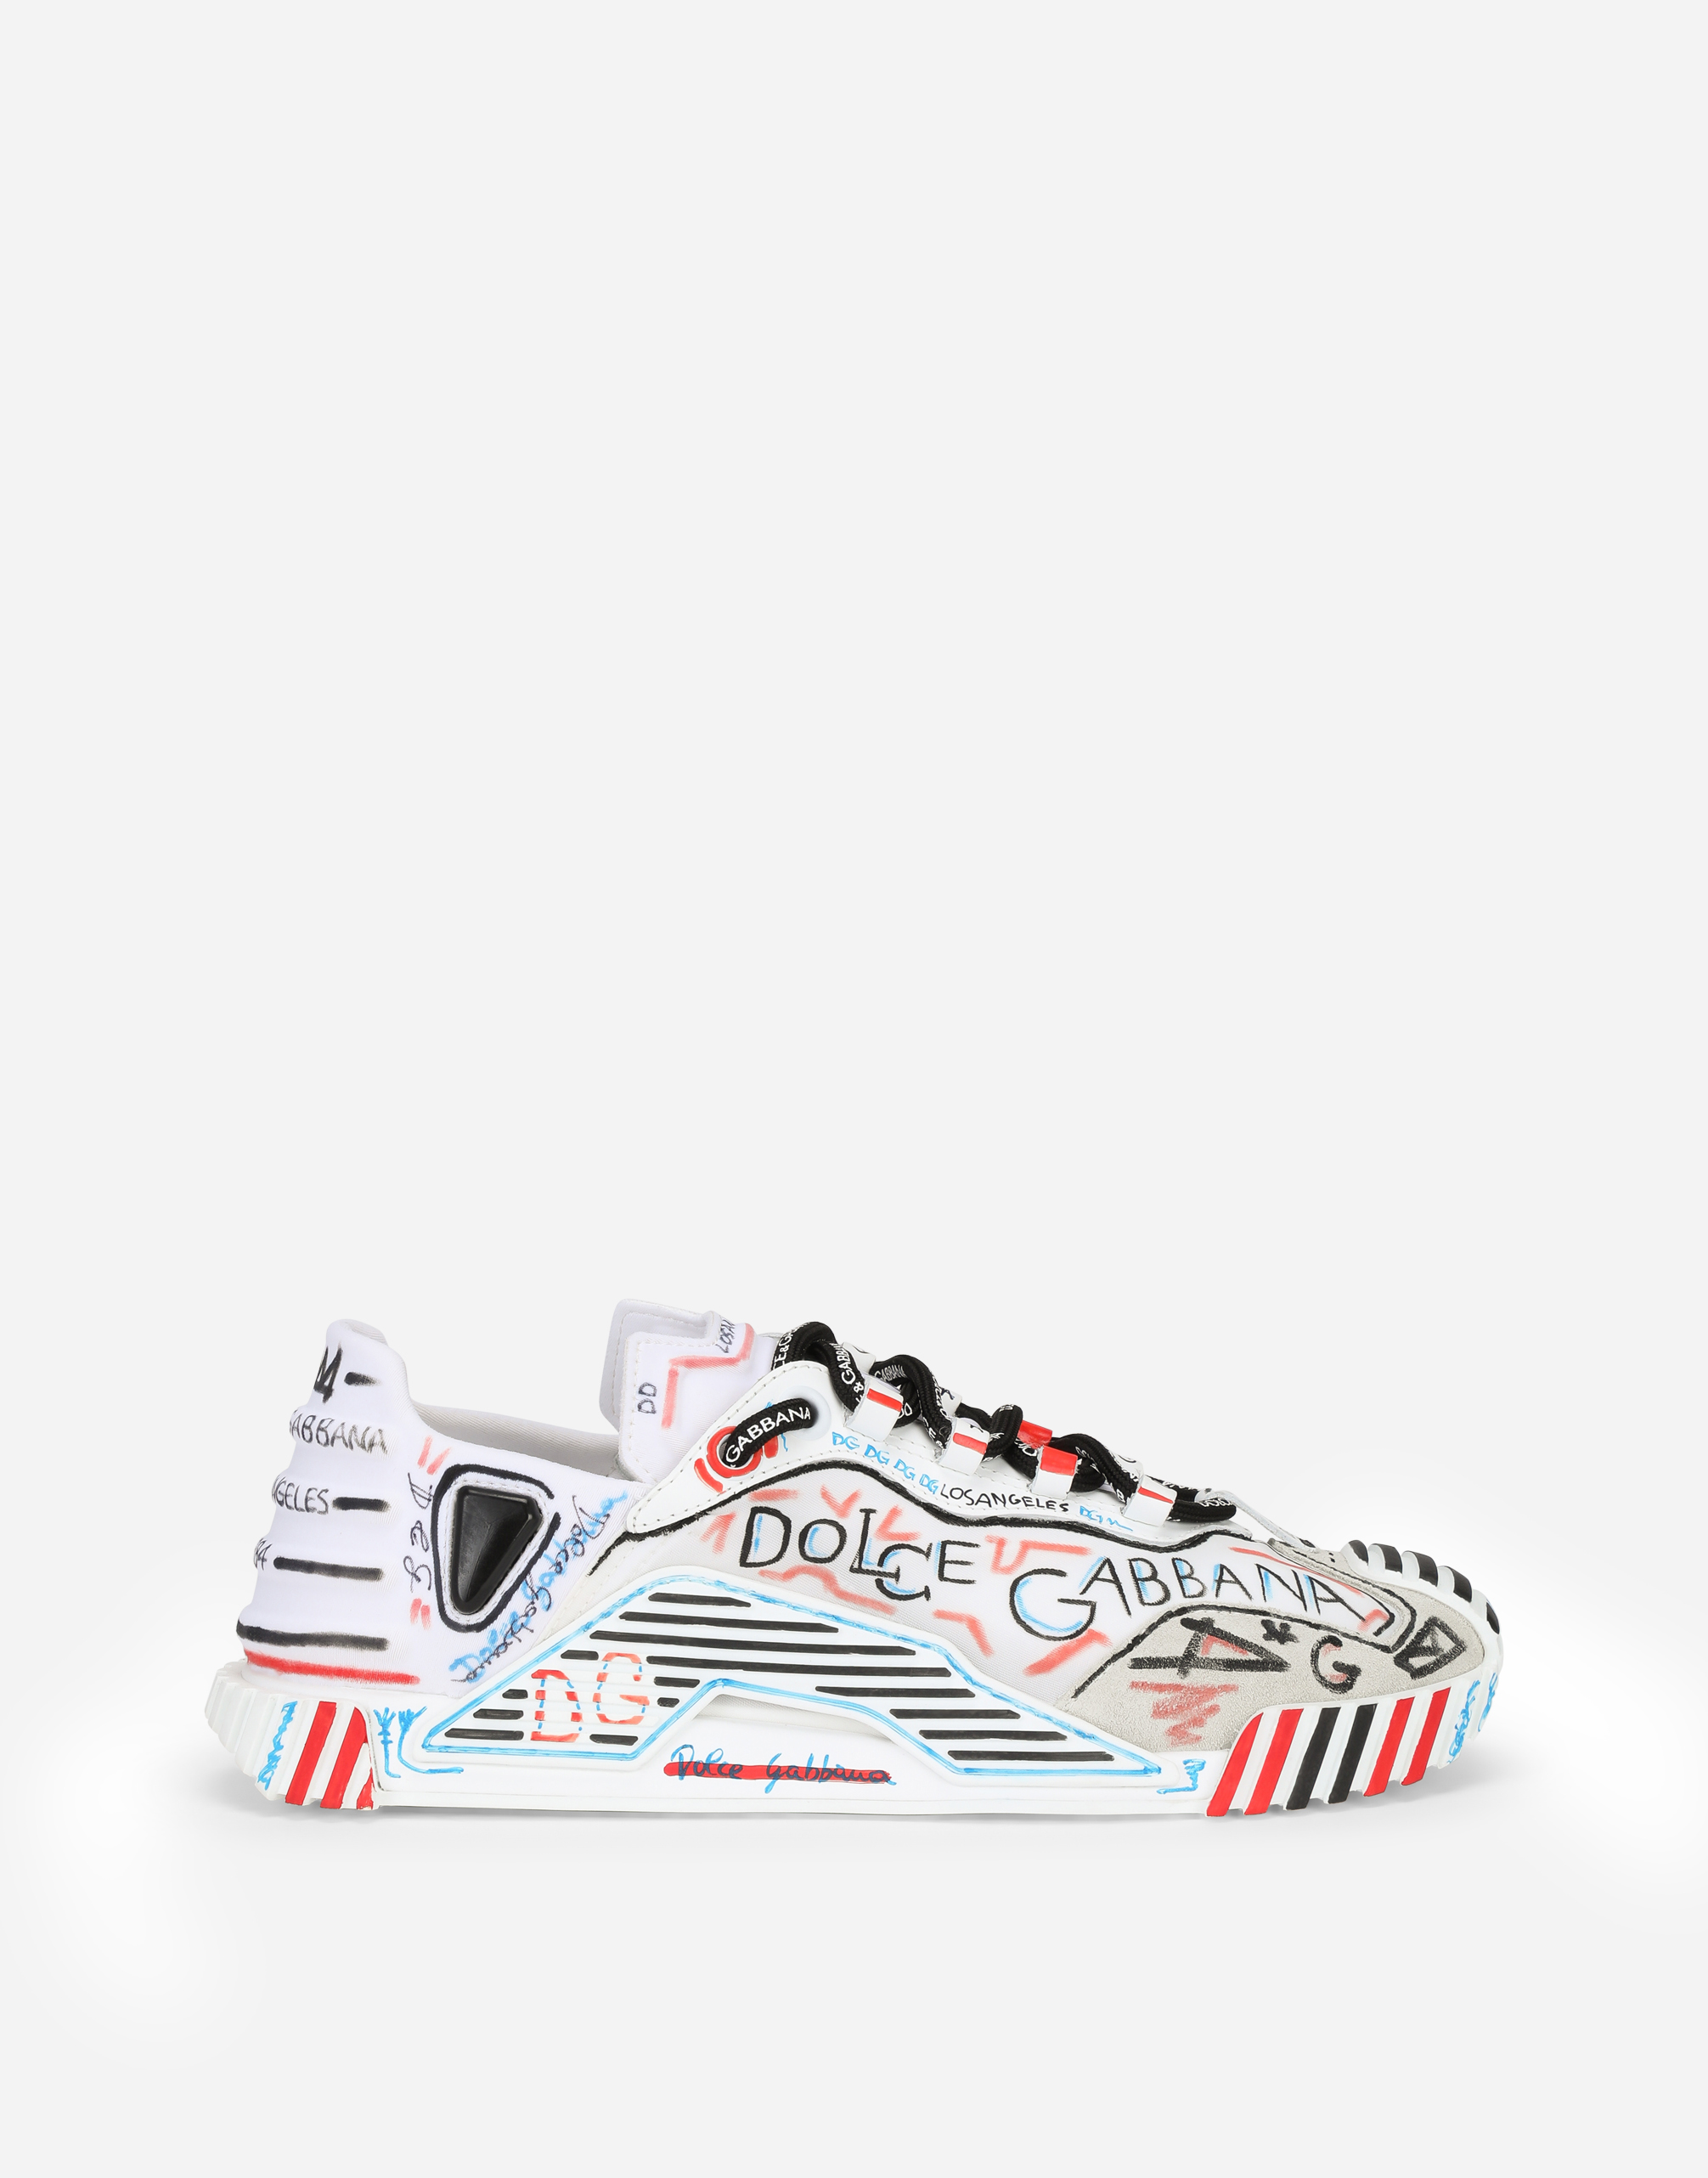 Mixed-materials Los Angeles NS1 slip-on sneakers in Los Angeles